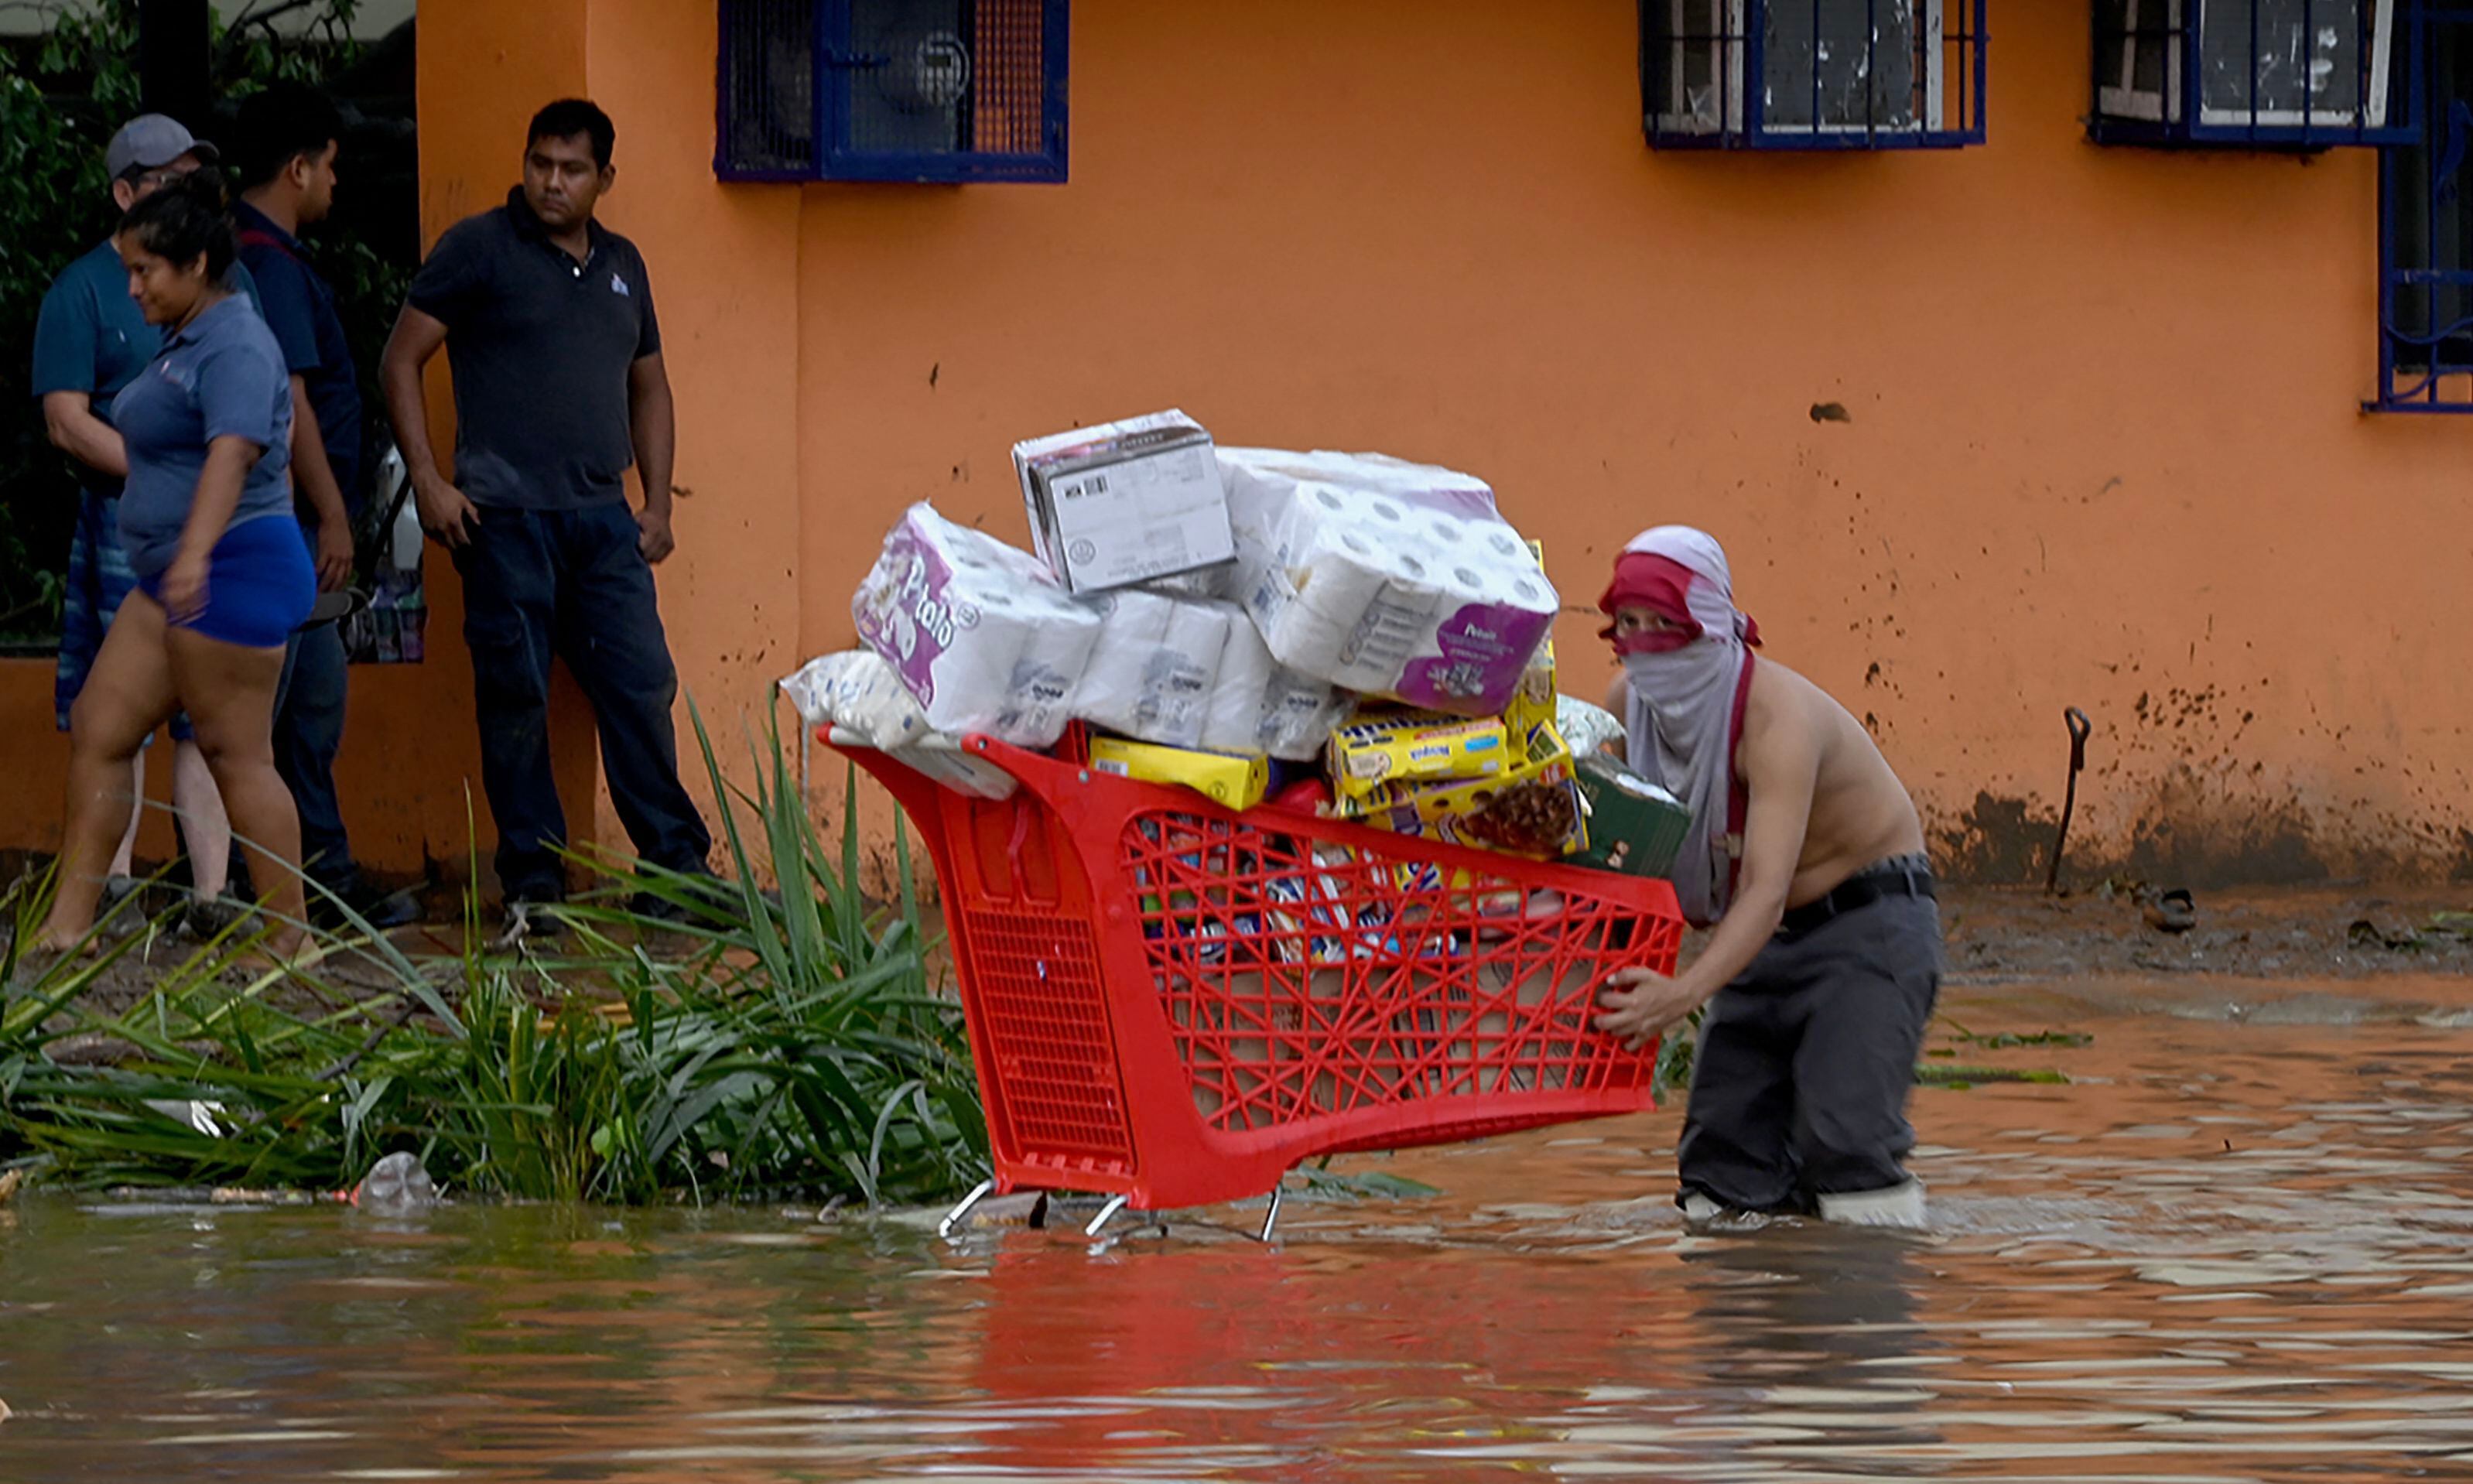 A looter carries a cart full of merchandise stolen from a supermarket after Hurricane Otis in Acapulco.  (Photo by FRANCISCO ROBLES/AFP).